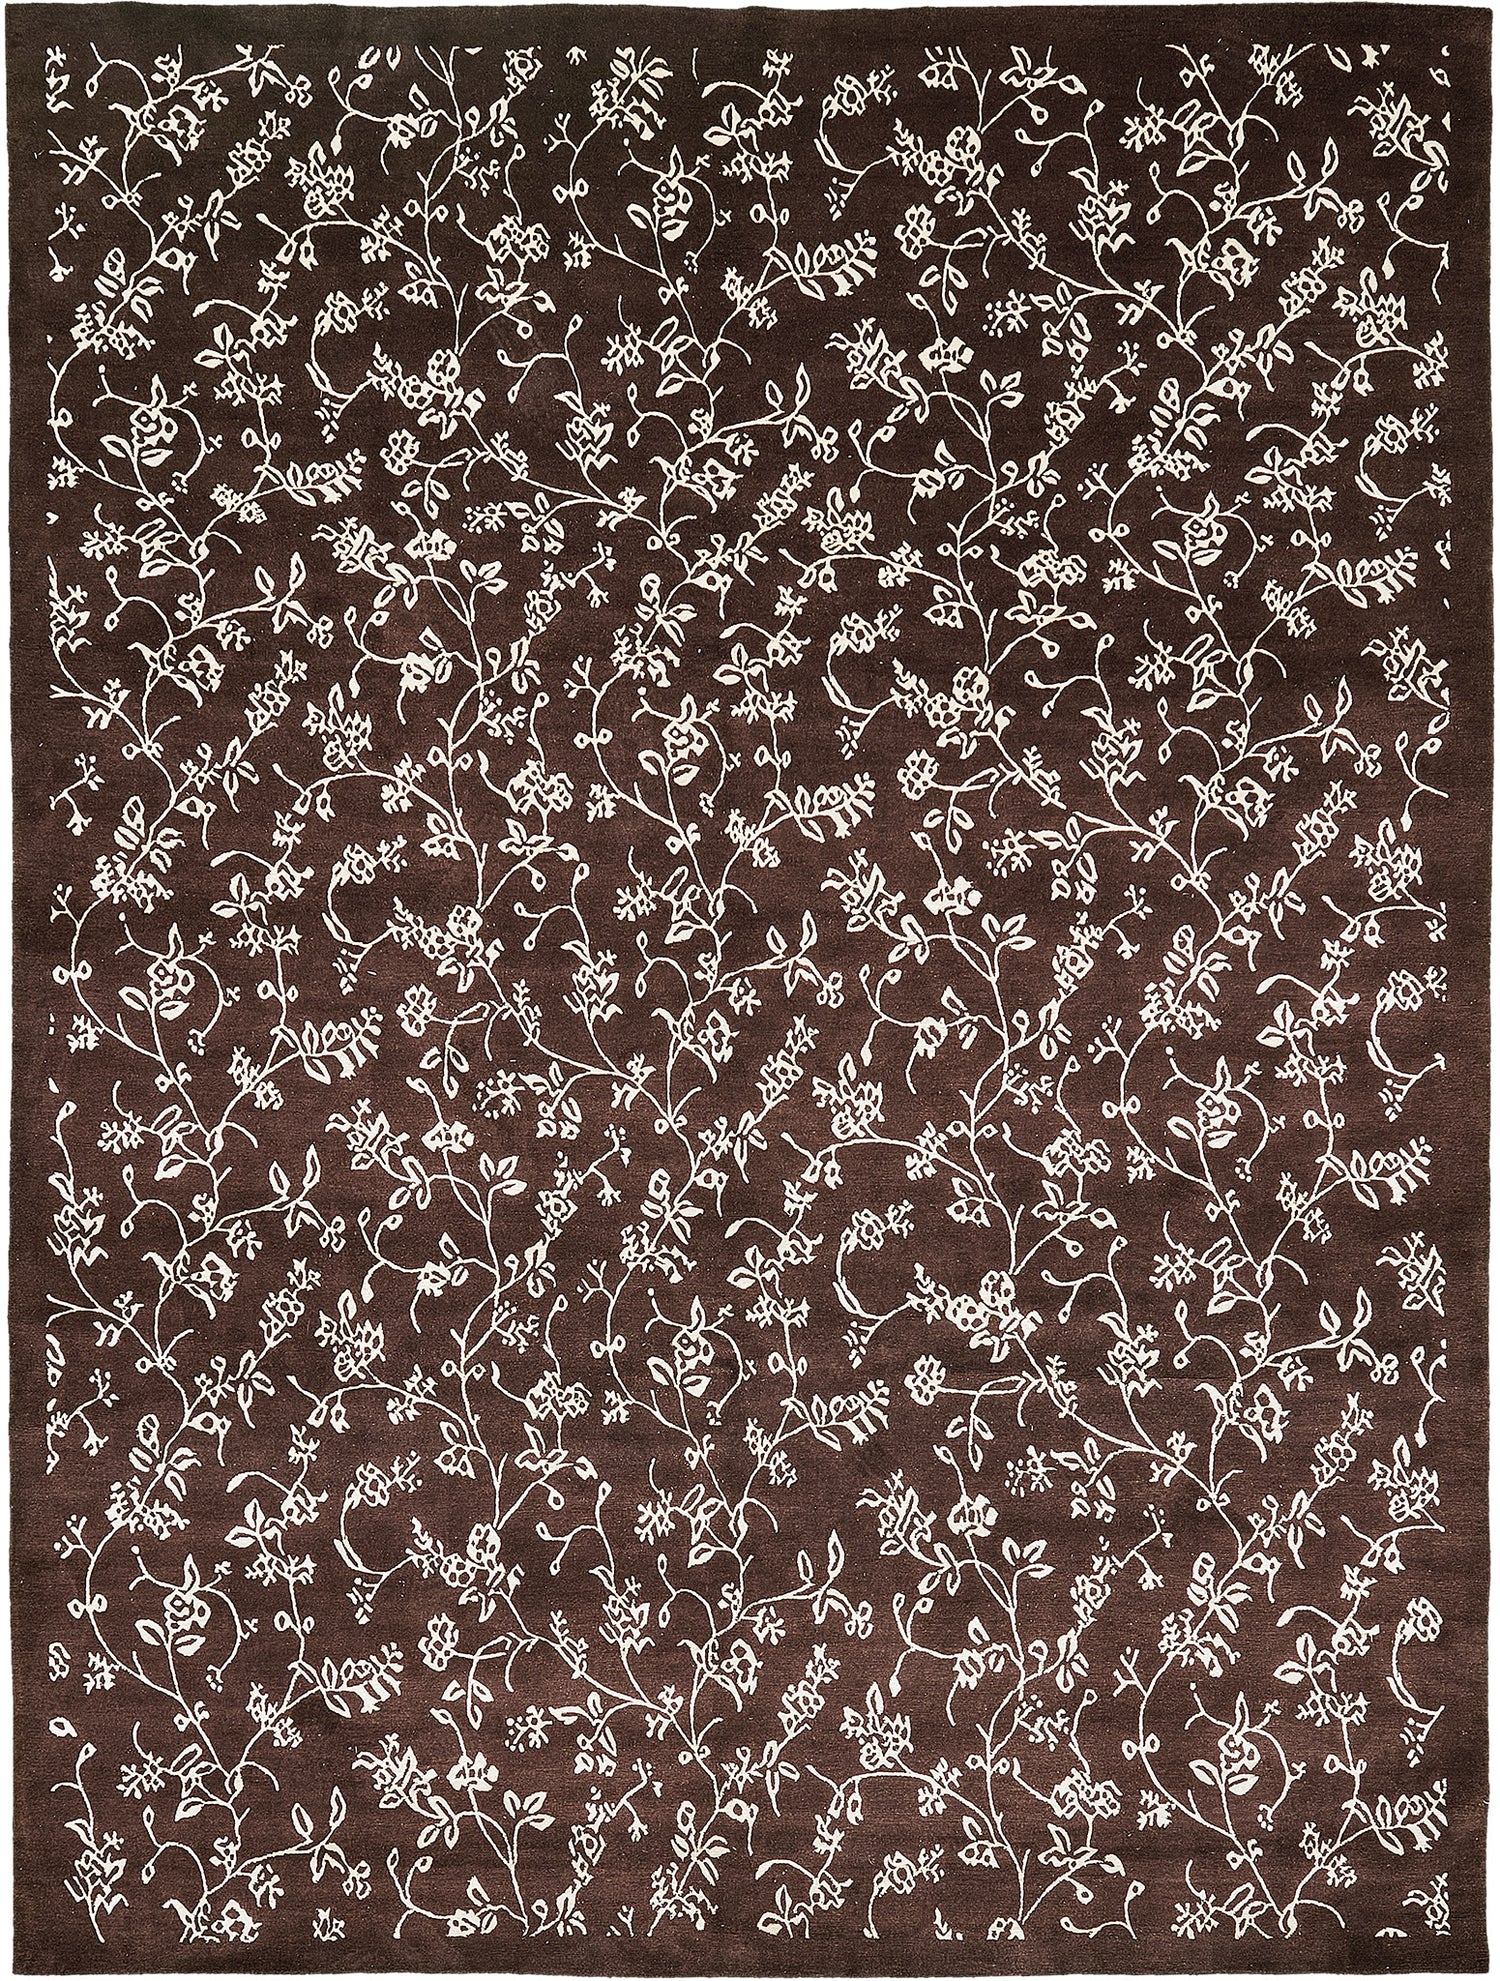 70% Off on Select Rugs